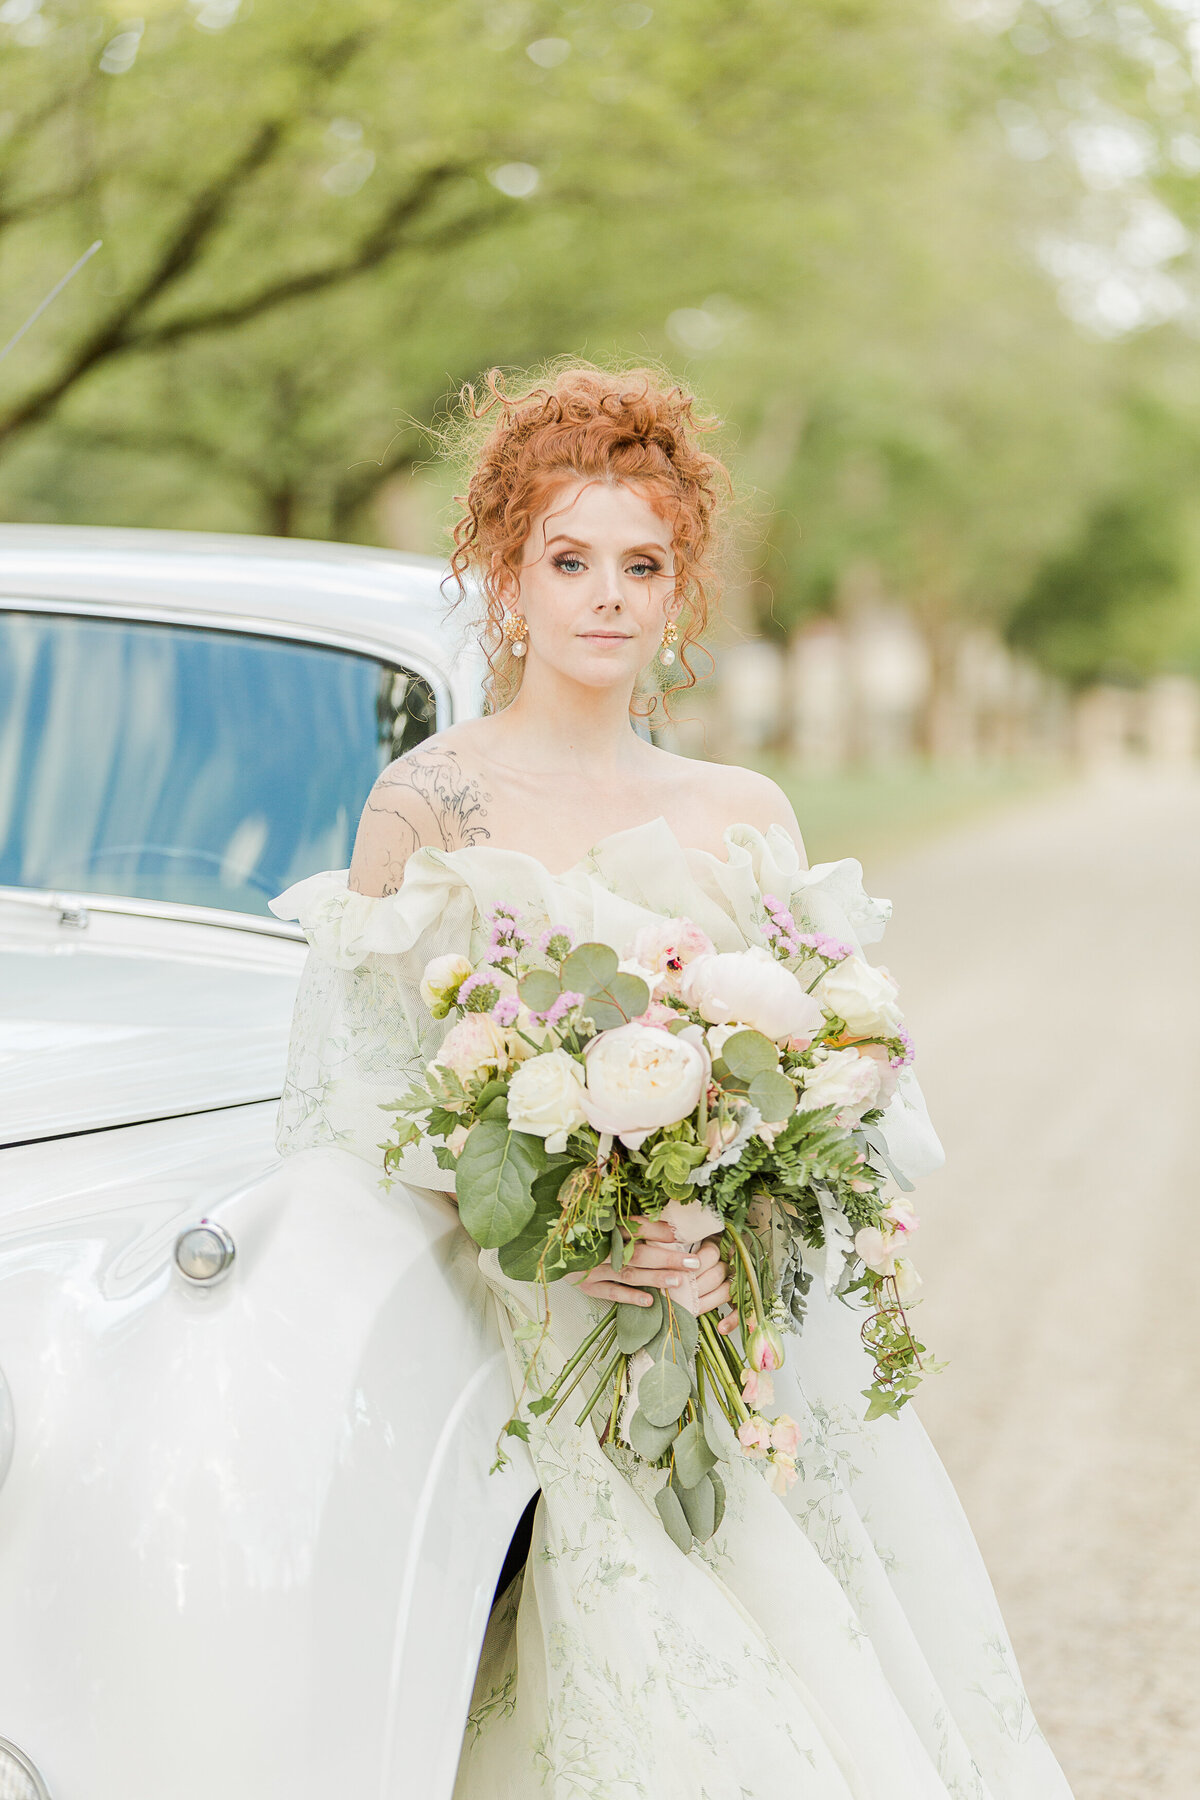 Bride poses against a vintage Rolls Royce for a formal bridal portrait. She is looking intently at the camera. Captured by best Massachusetts wedding photographer Lia Rose Weddings